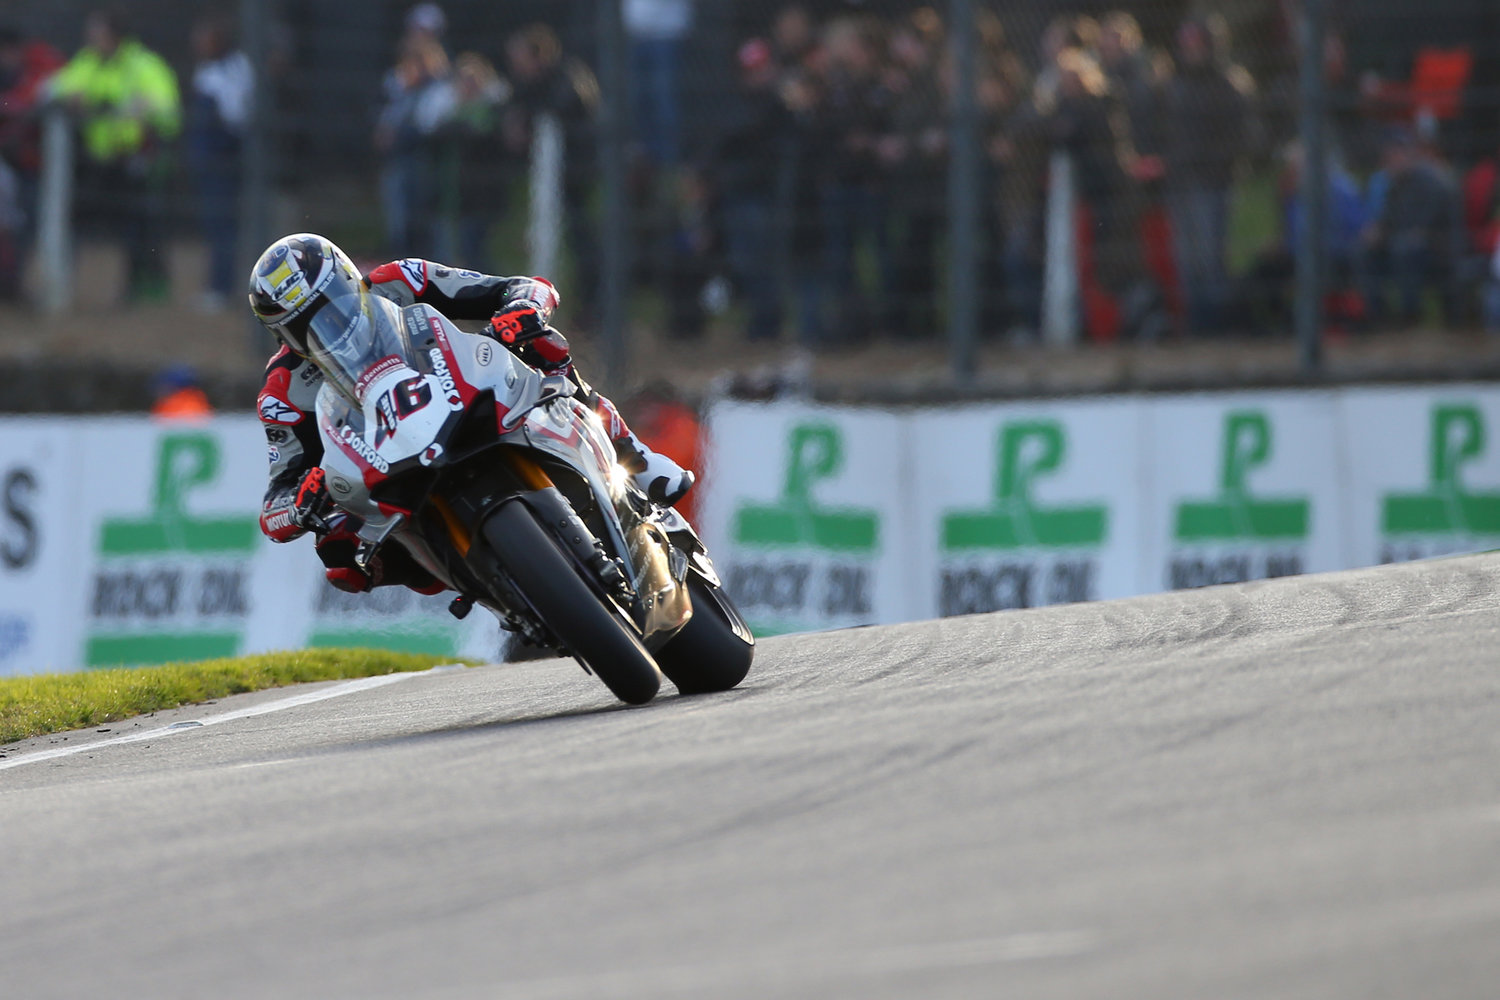 Tommy Bridewell finishes 3rd in the 2019 British Superbike Championship ...